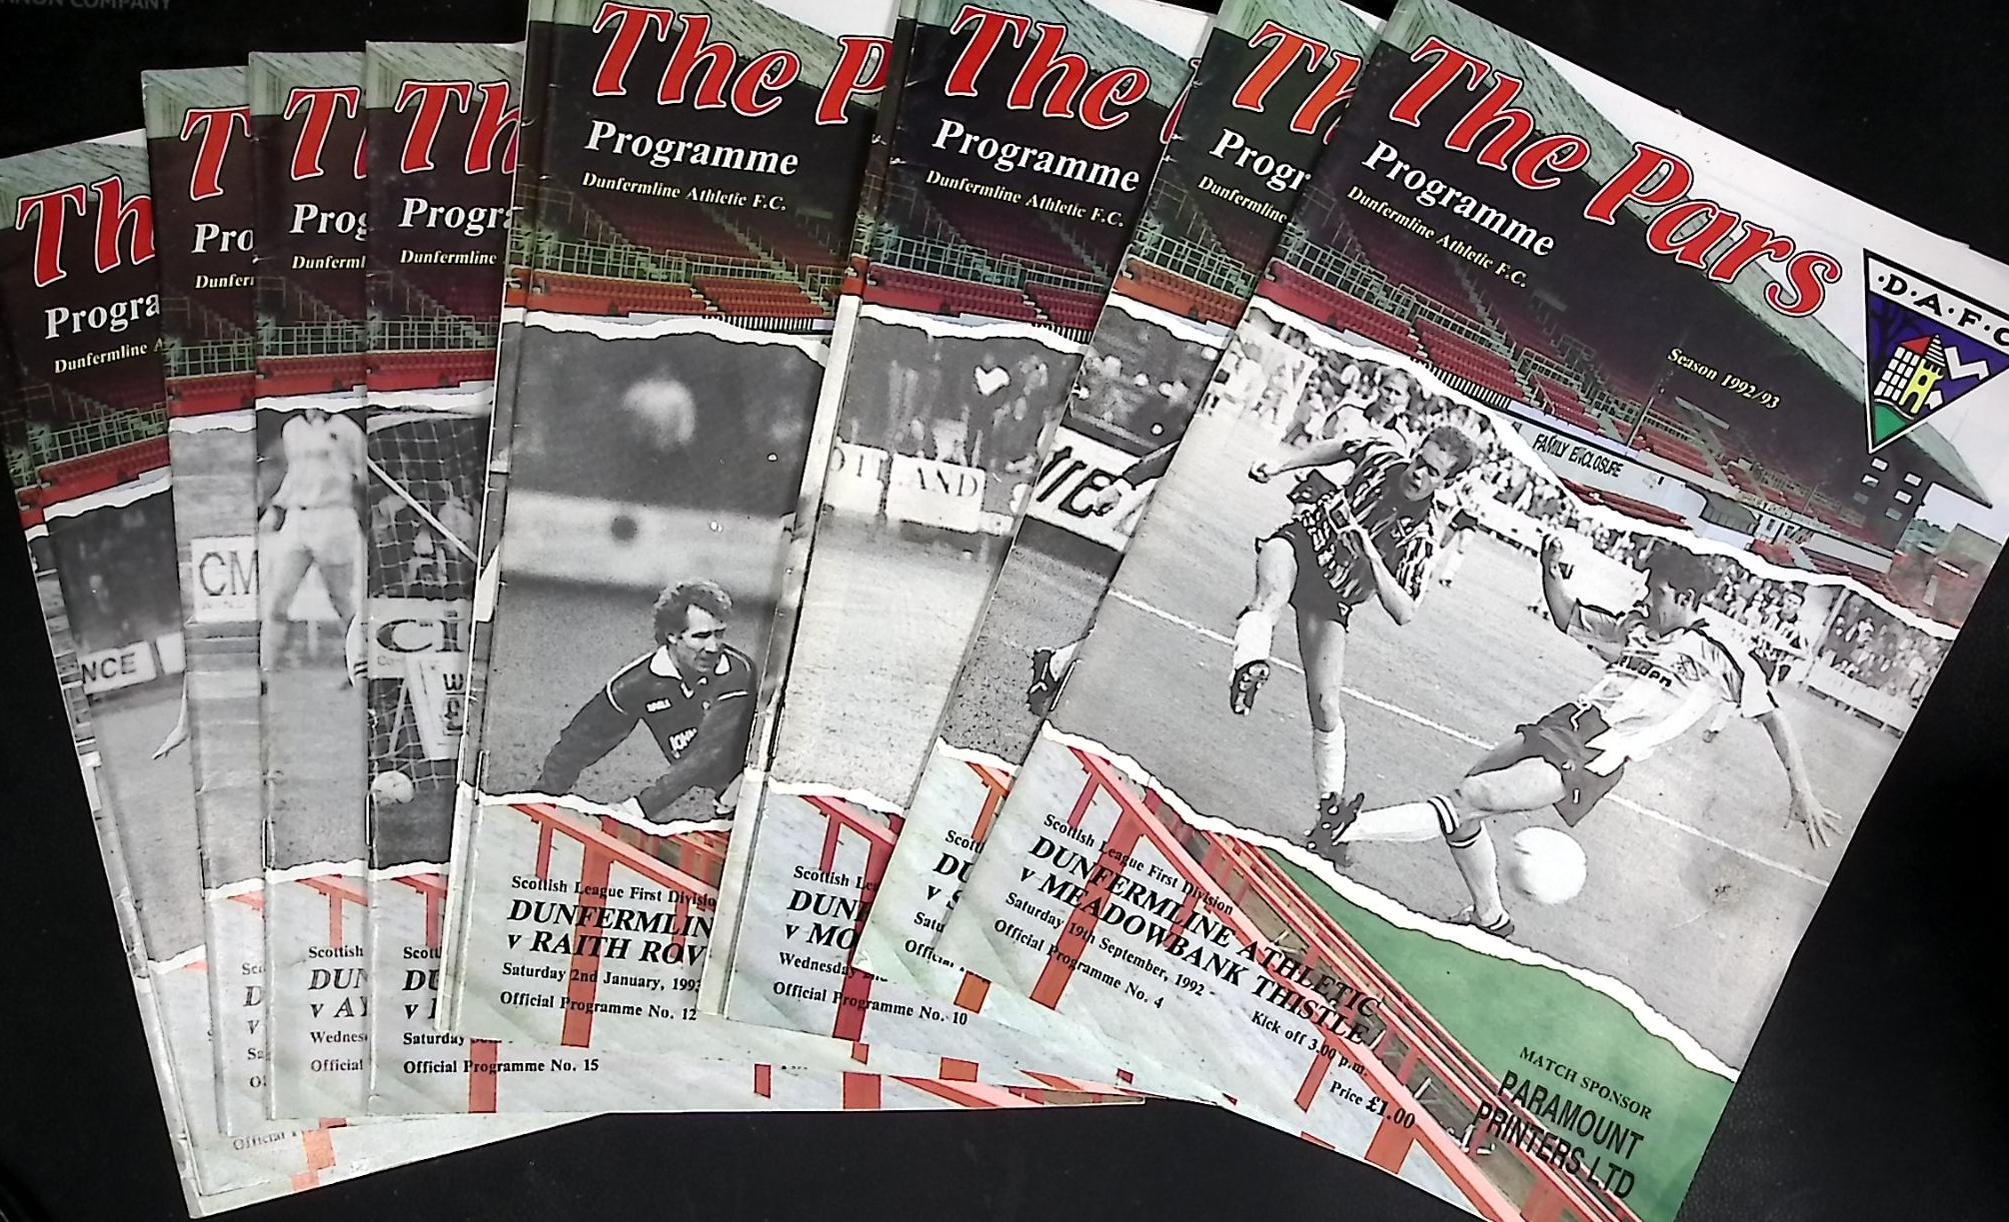 Dunfermline Athletic Football Programmes. The Pars. 1992-93 Season. 11 issues.